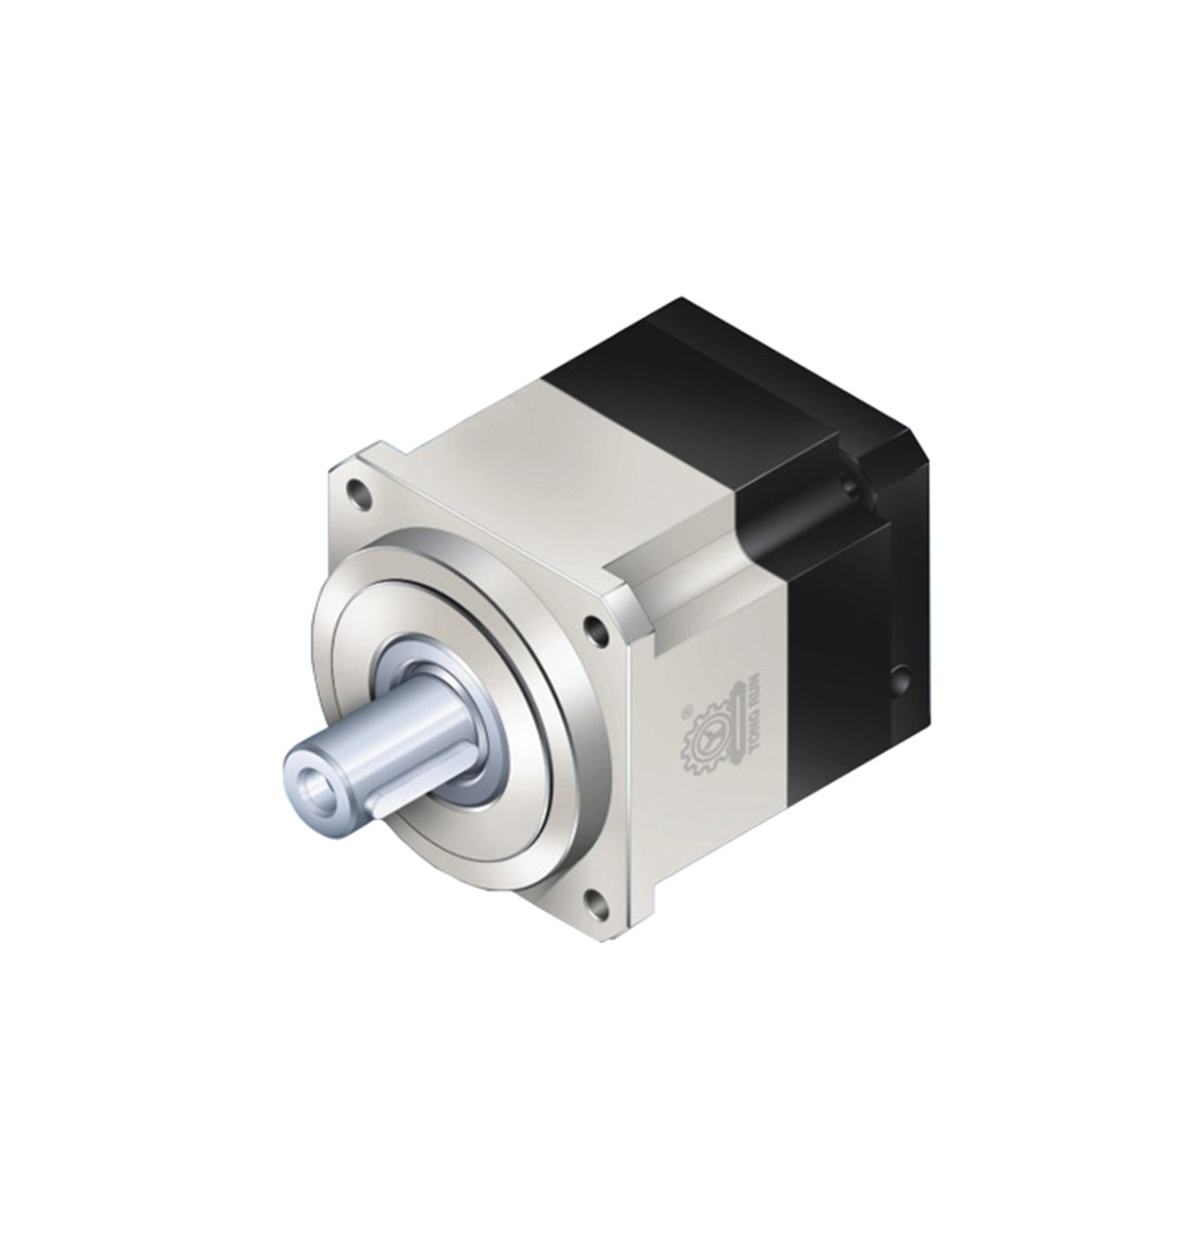 Single-stage planetary gearboxes